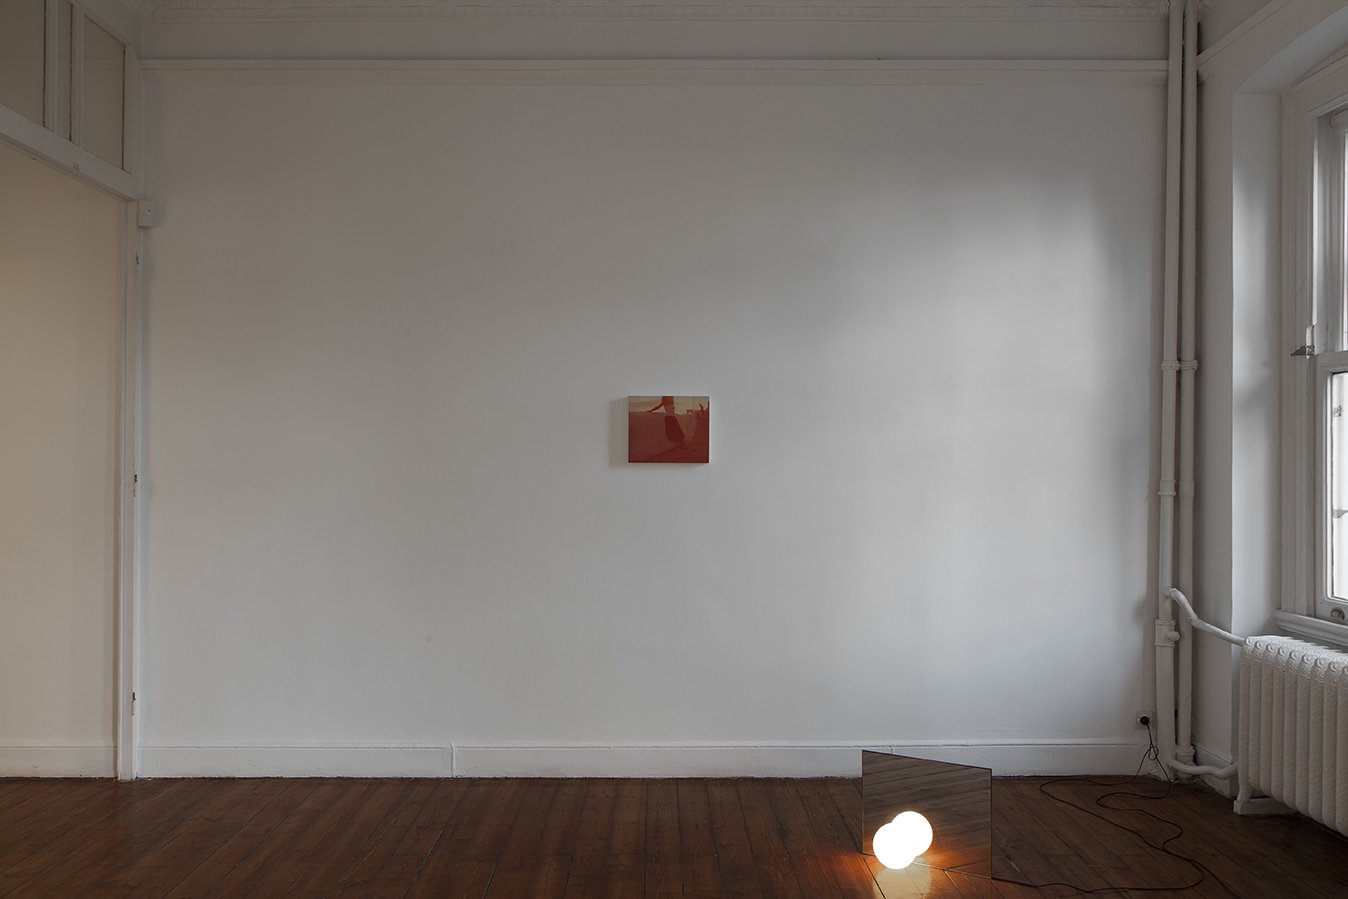 Eftihis Patsourakis, Headless, oil on wood, 29 x 35.3 cm, 2014. Installation view, Doings on Time and Light, Rodeo, Istanbul, 2014